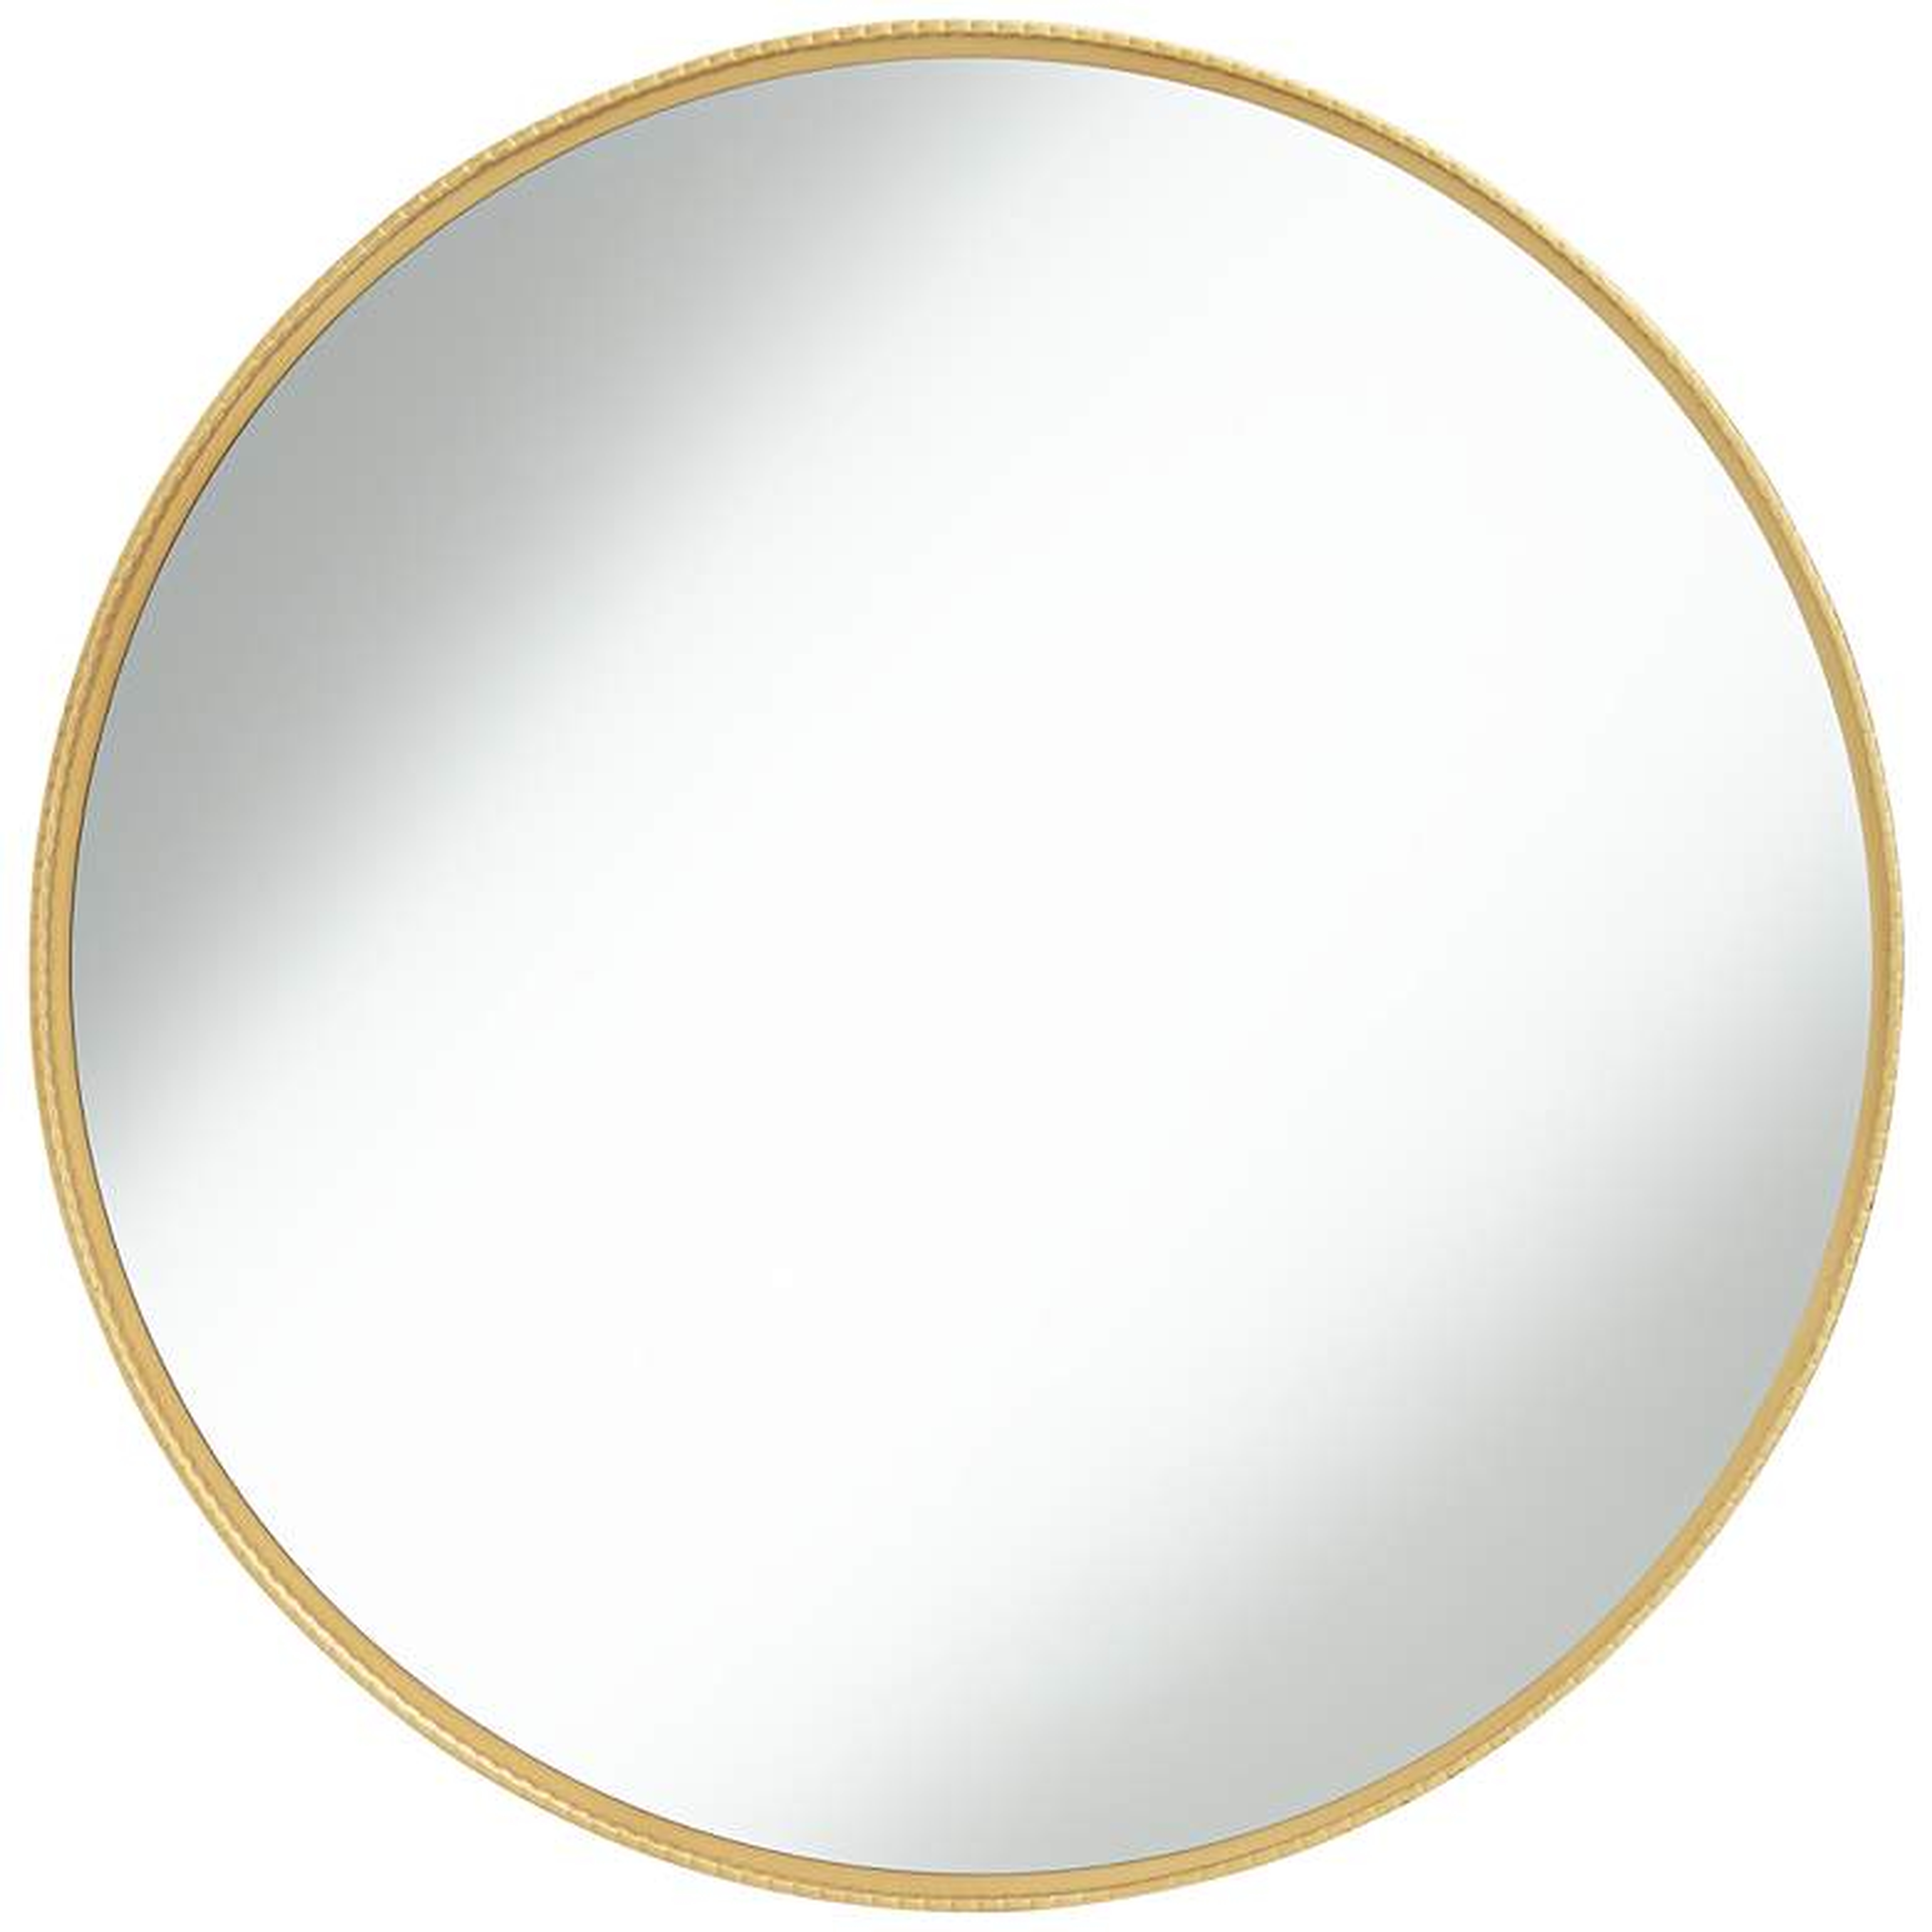 Cally Gold 31 1/2" Round Metal Wall Mirror - Style # 76A82 - Lamps Plus